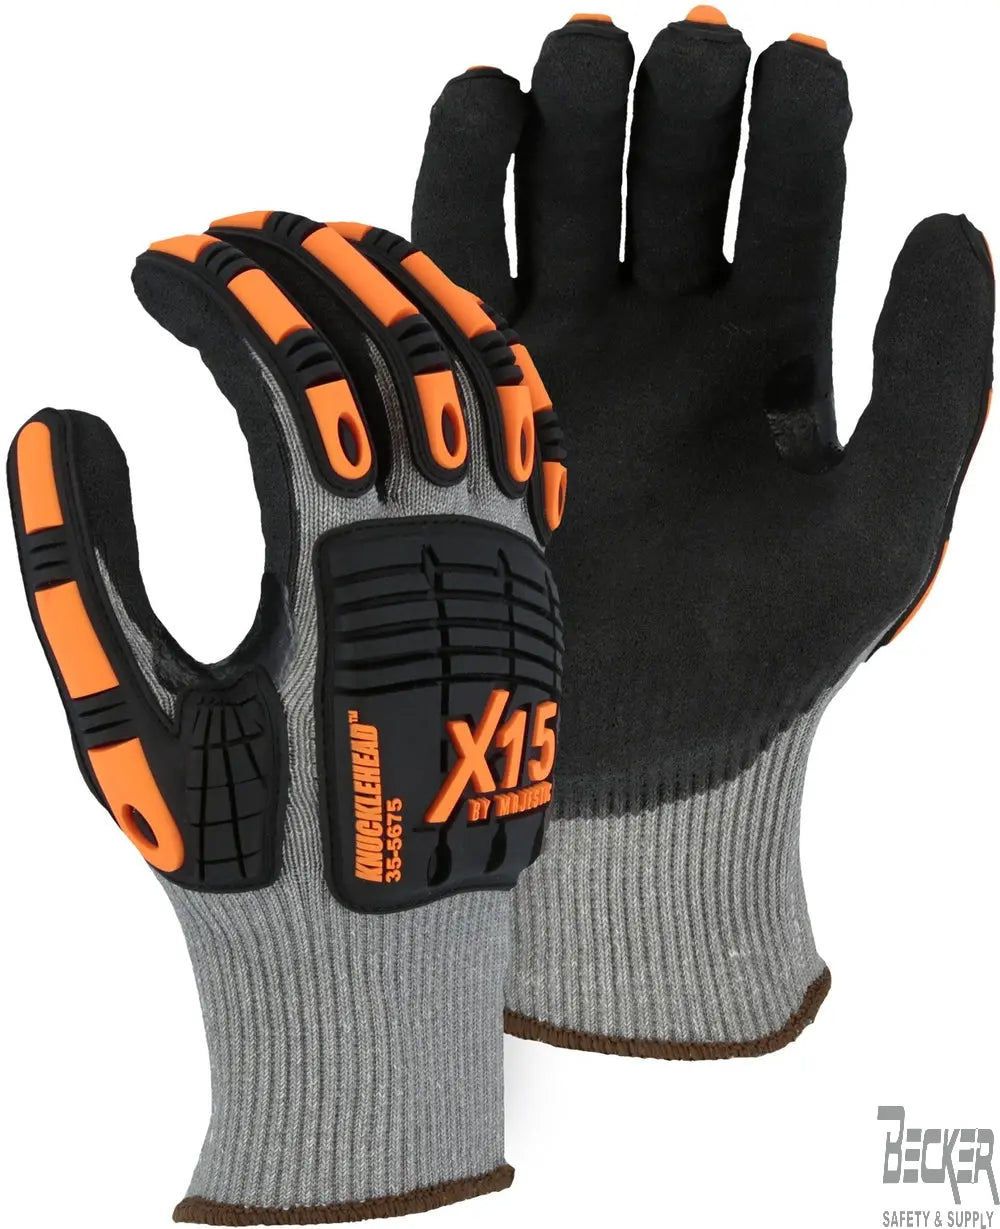 MAJESTIC - Cut-Less X-15 Cut & Impact Glove with Double Sandy Nitrile Coating - Becker Safety and Supply